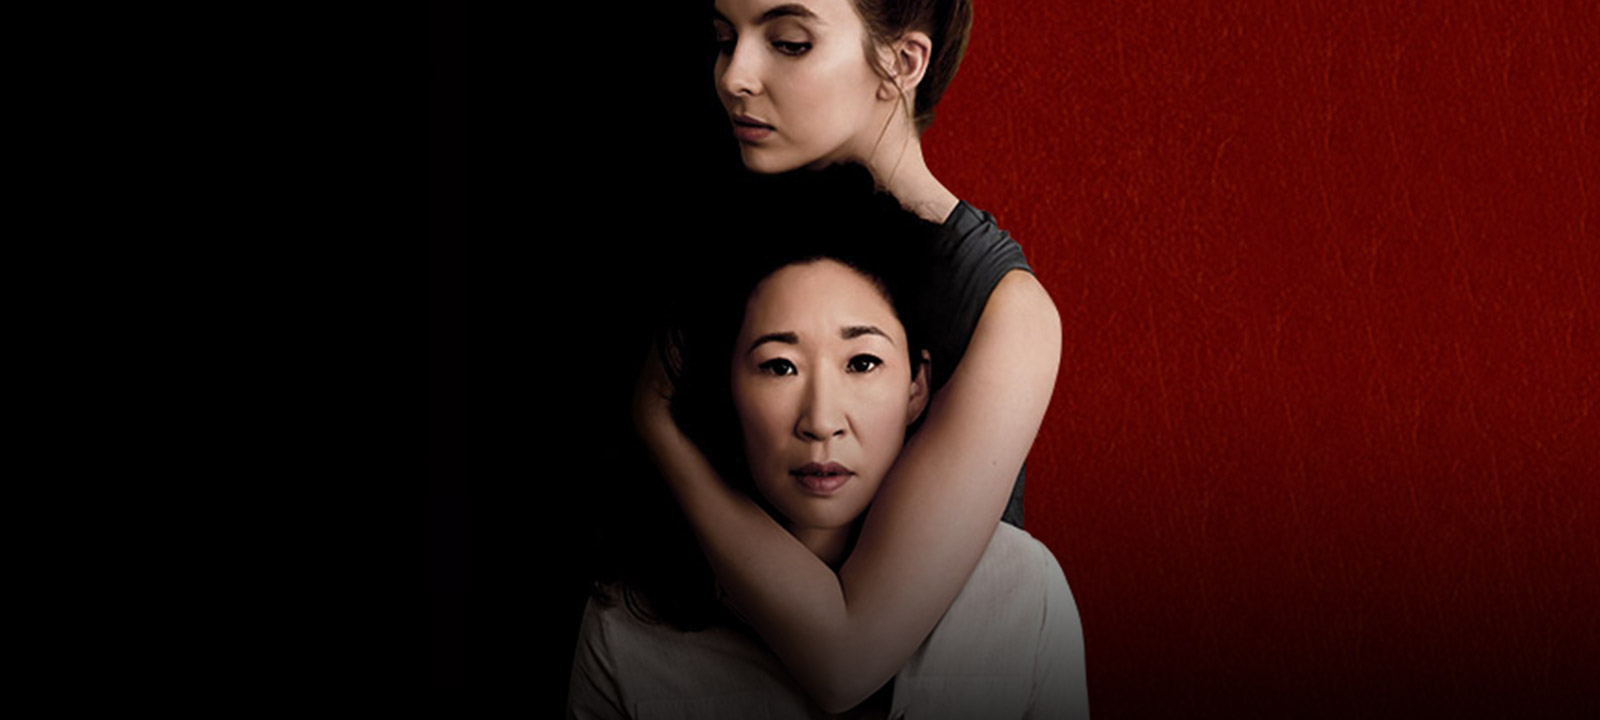 Killing Eve TV Show Cancelled?